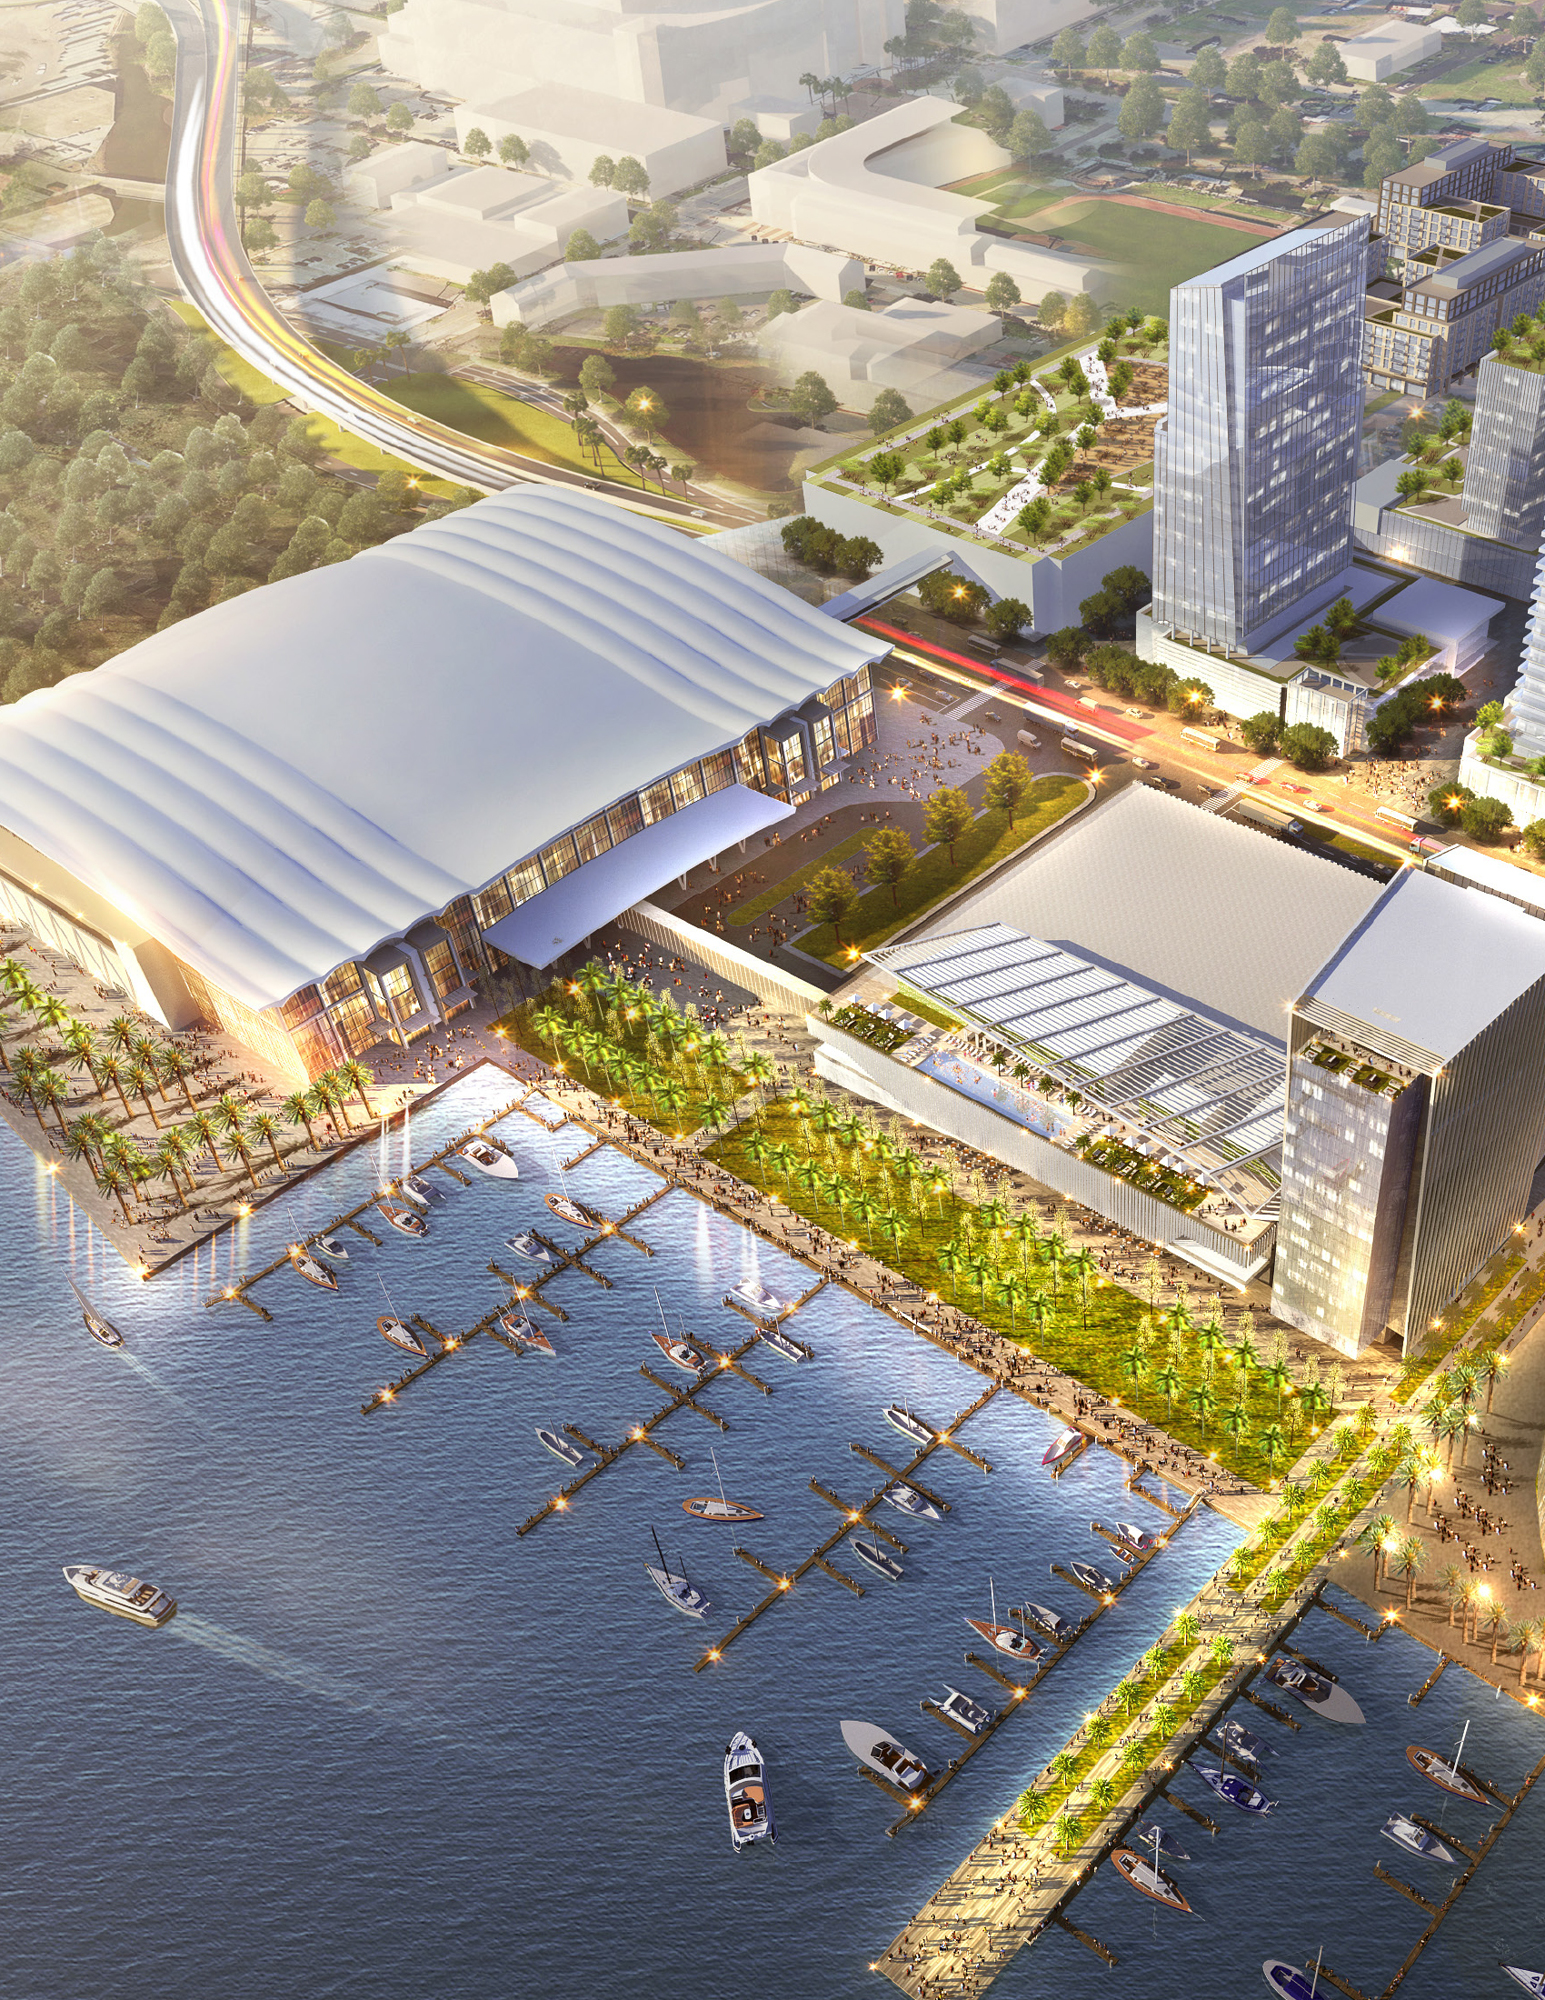 Iguana Investments, owned by Jacksonville Jaguars owner Shad Khan, envisions a convention center complex to replace Metropolitan Park.